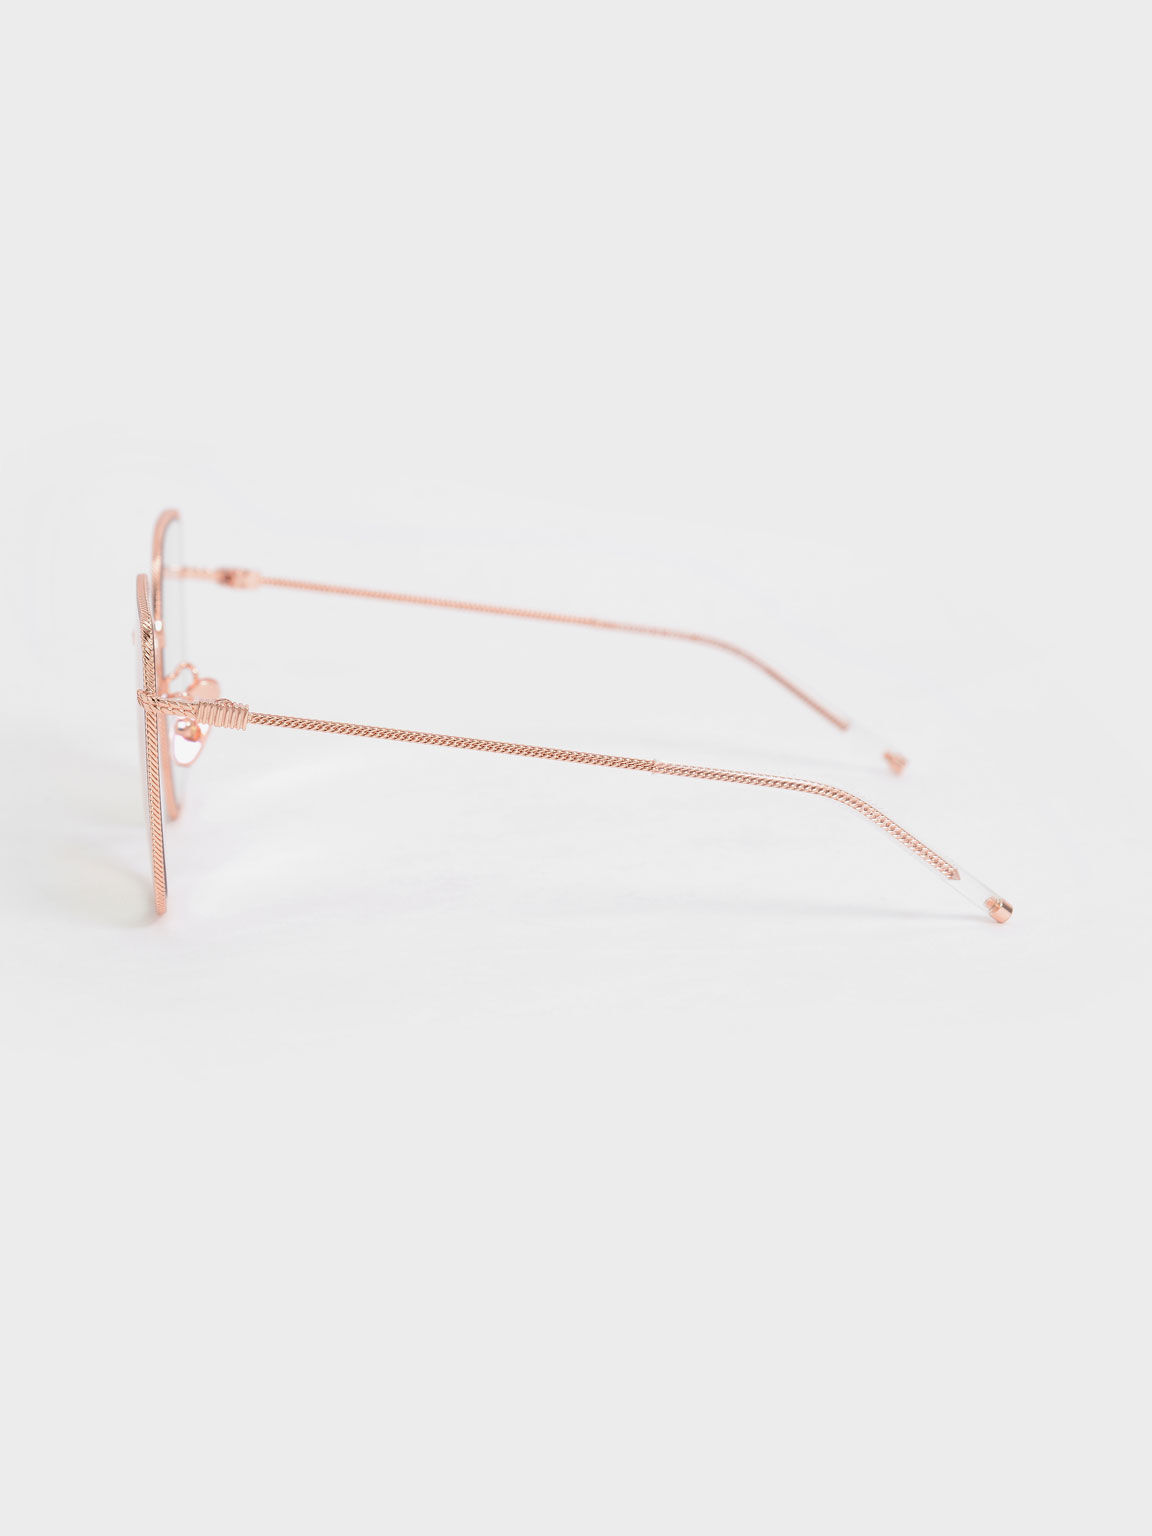 Geometric Butterfly Sunglasses, Rose Gold, hi-res